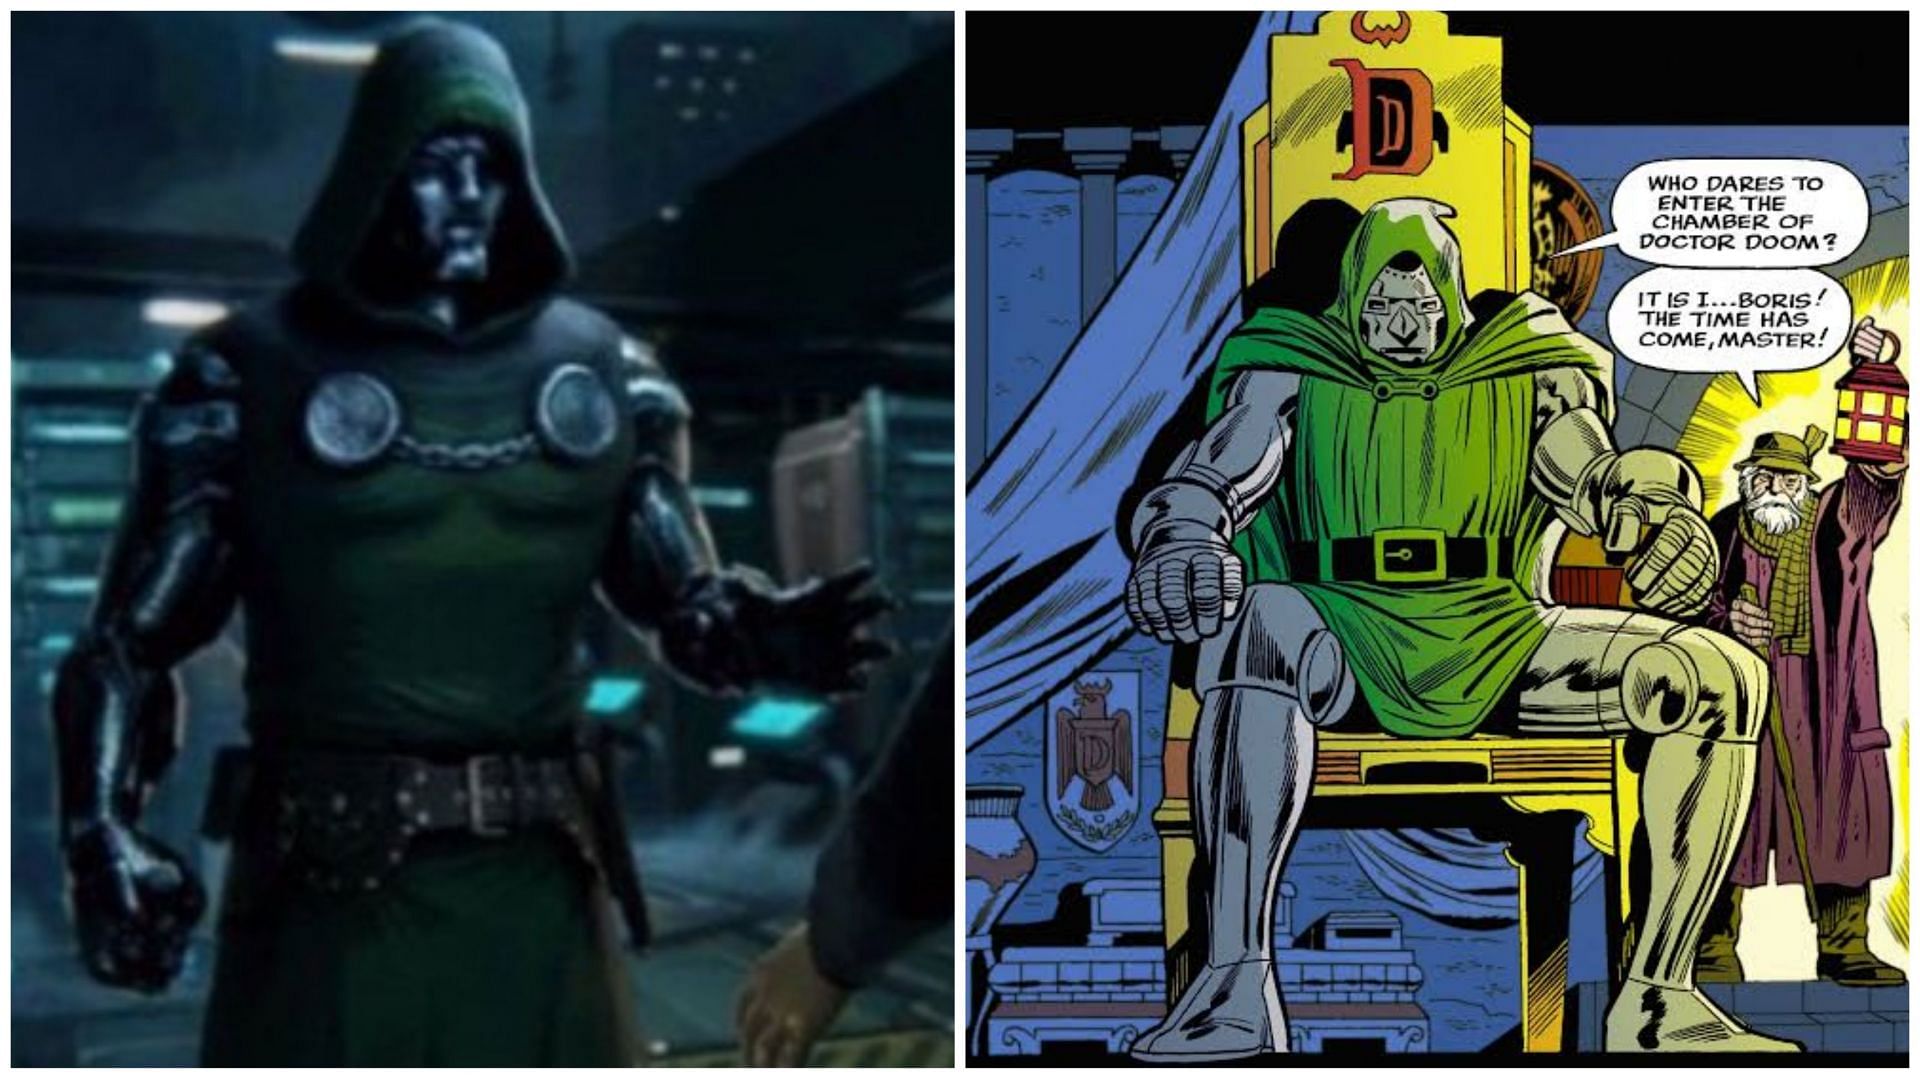 Rumored concept art of Doctor Doom and the character from the comics (Image via @Moth_Culture and Marvel Comics)